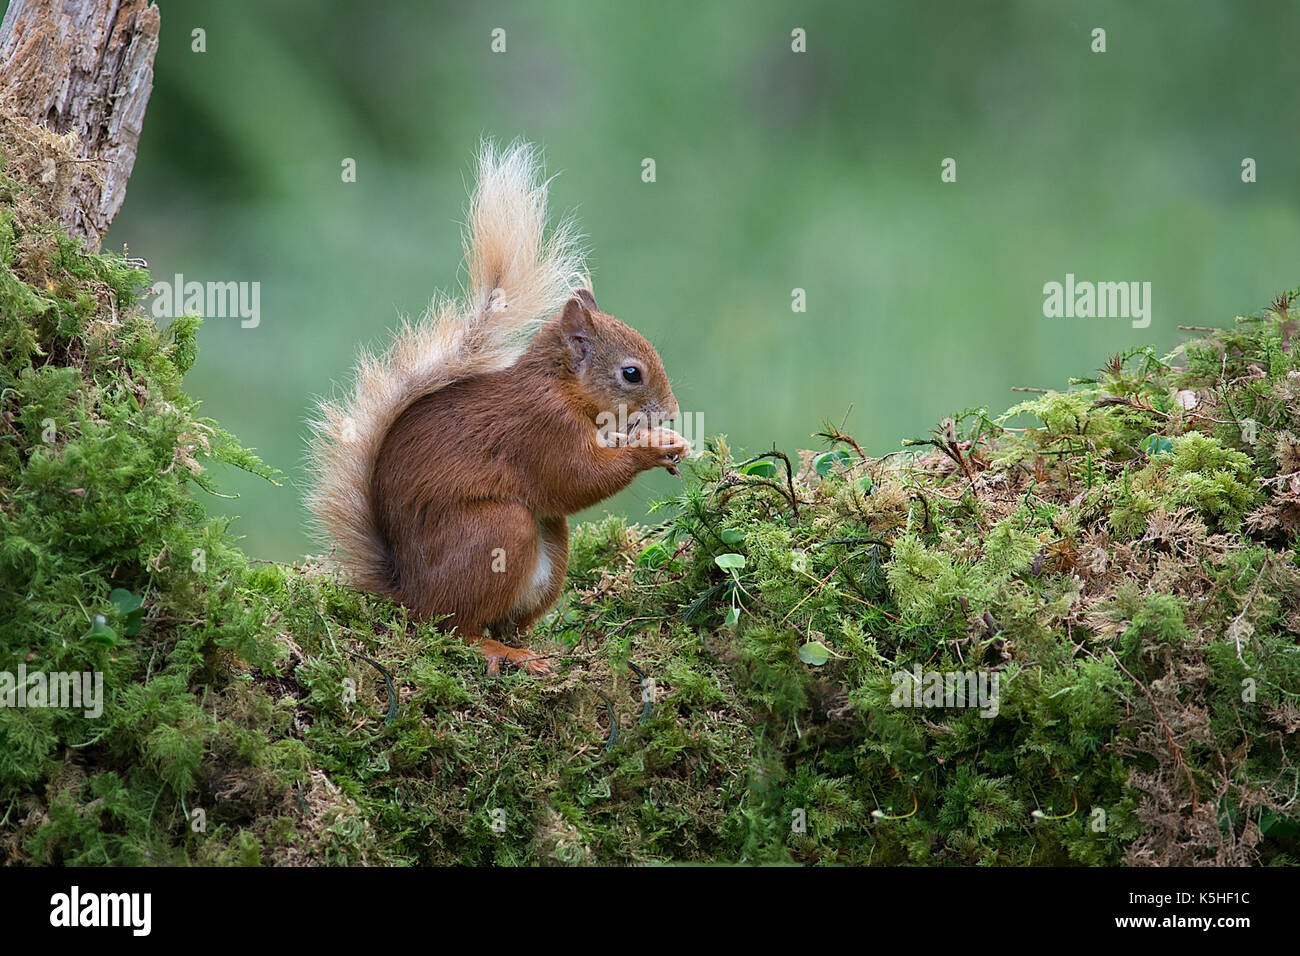 A red squirrel sits on a tree trunk covered in lichen eating a nut showing its bushy tail Stock Photo